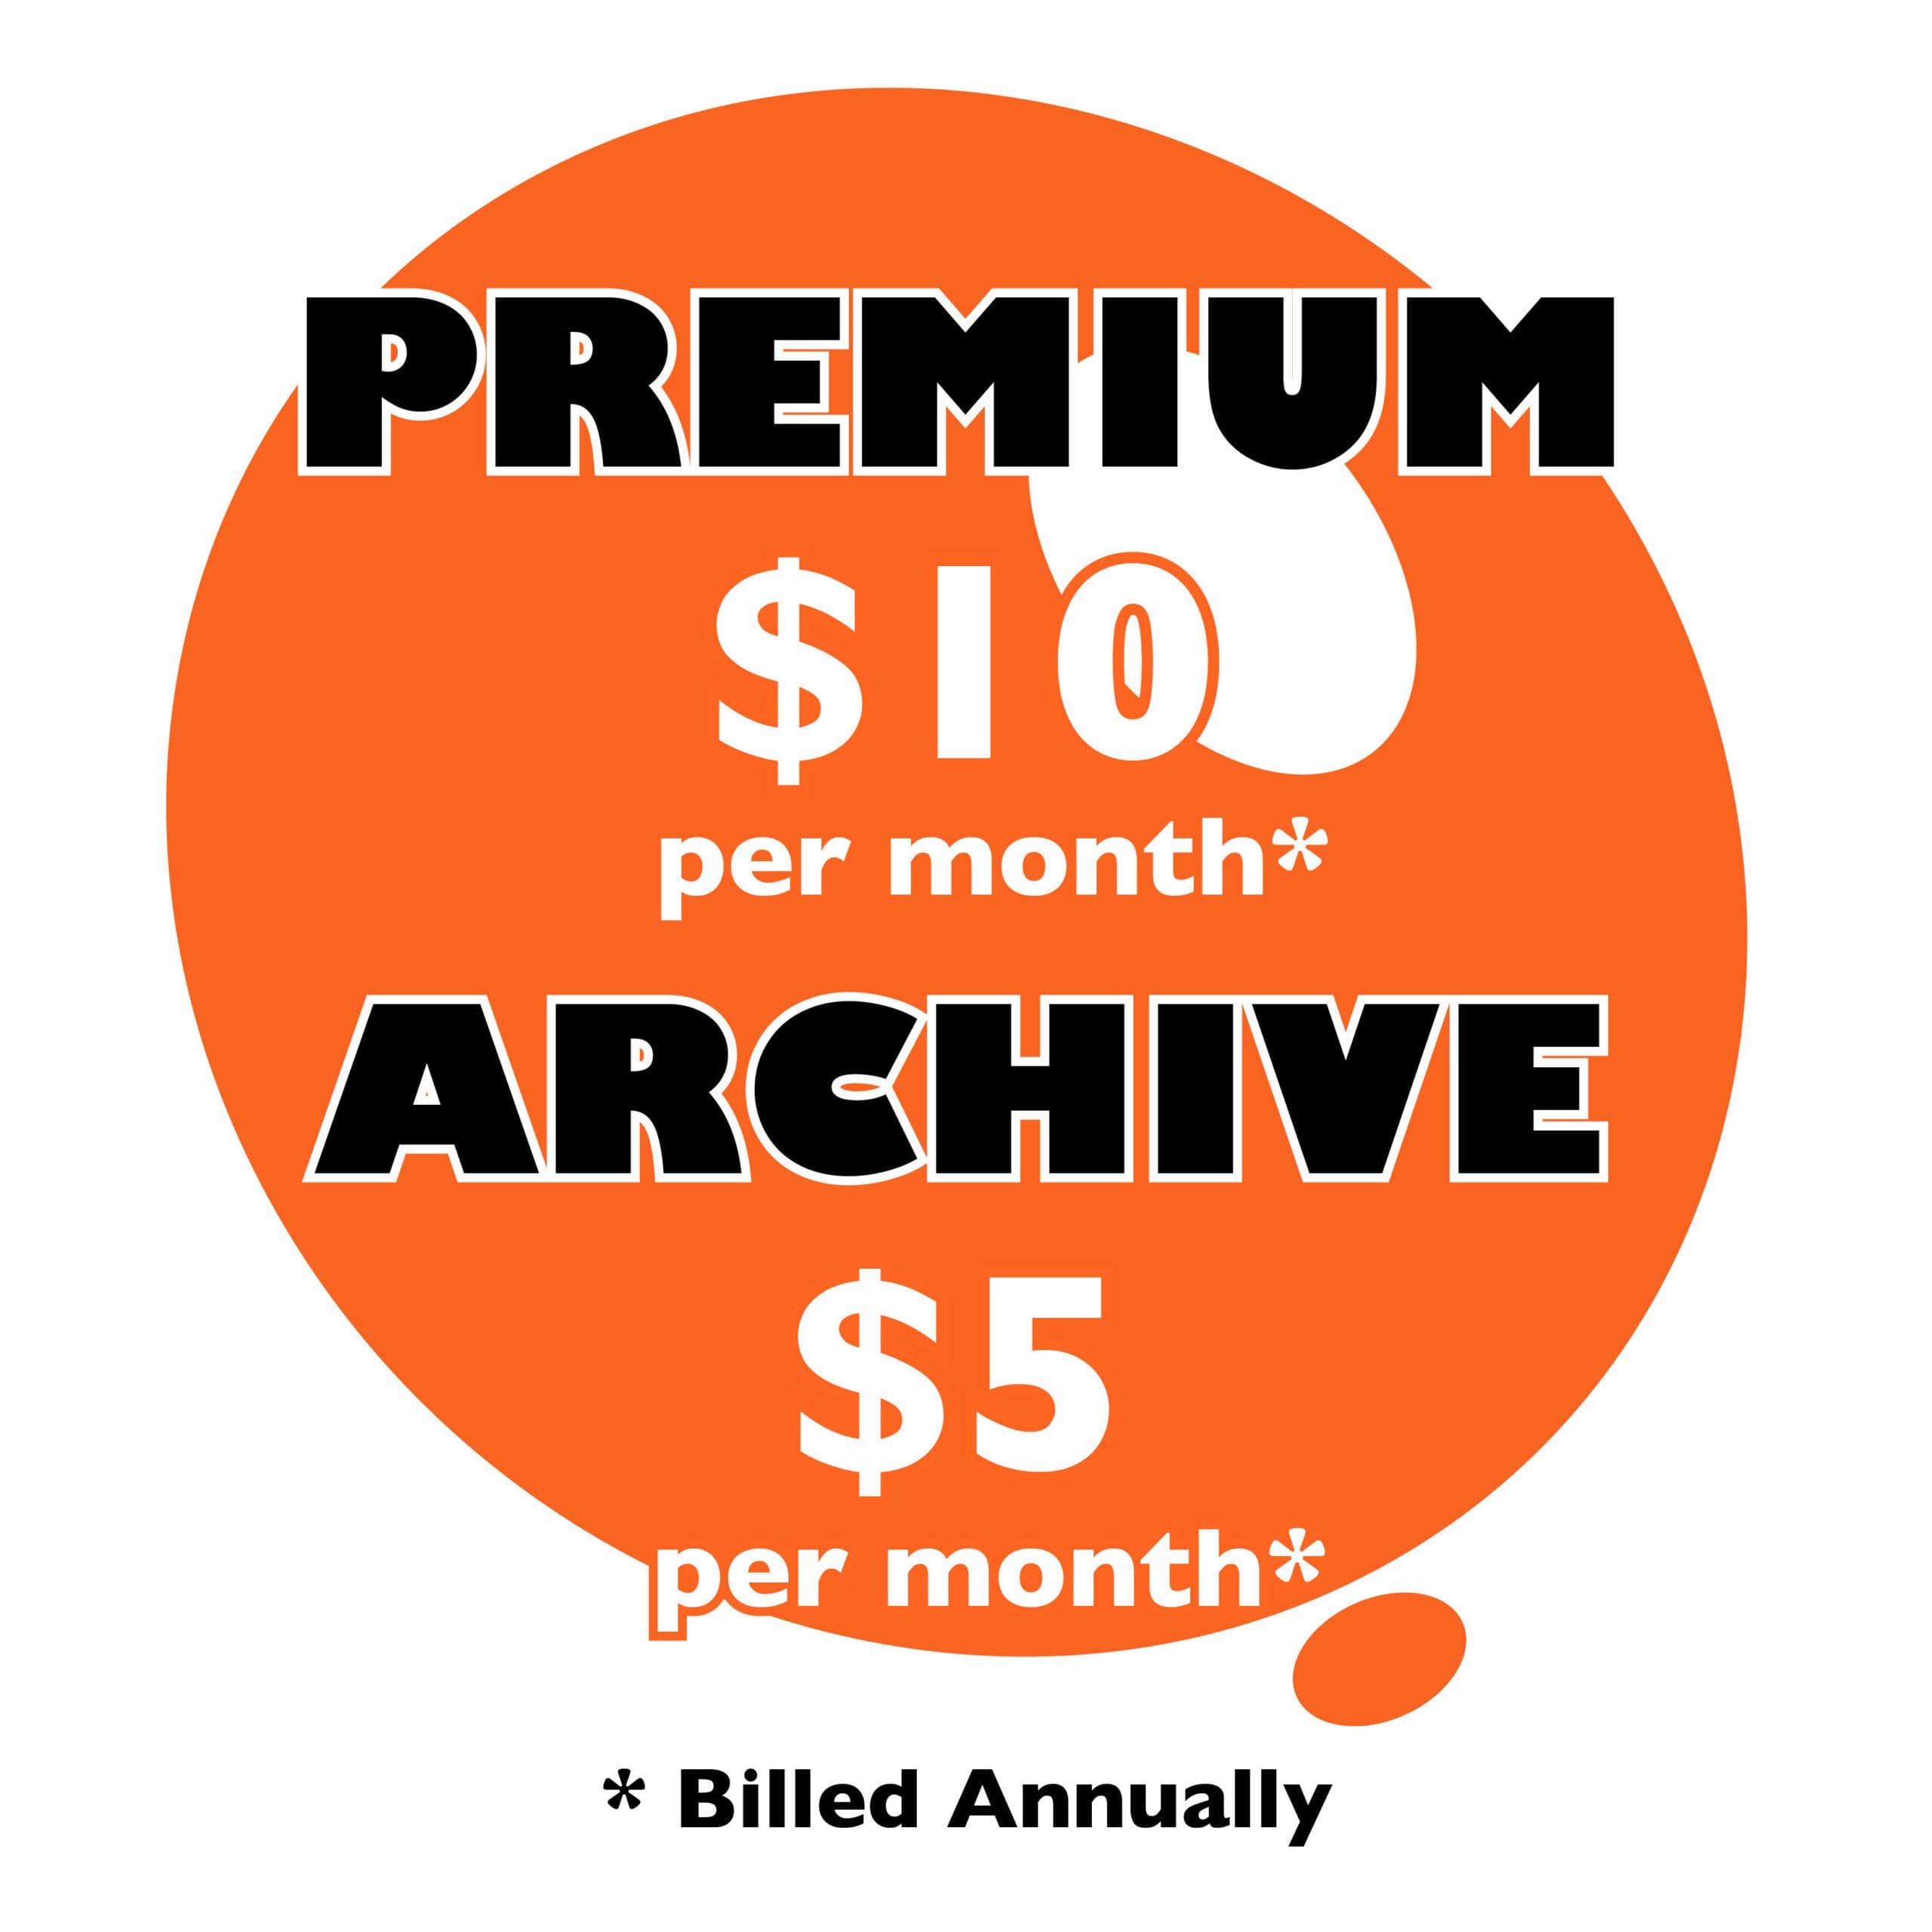 Premium and Archive fee